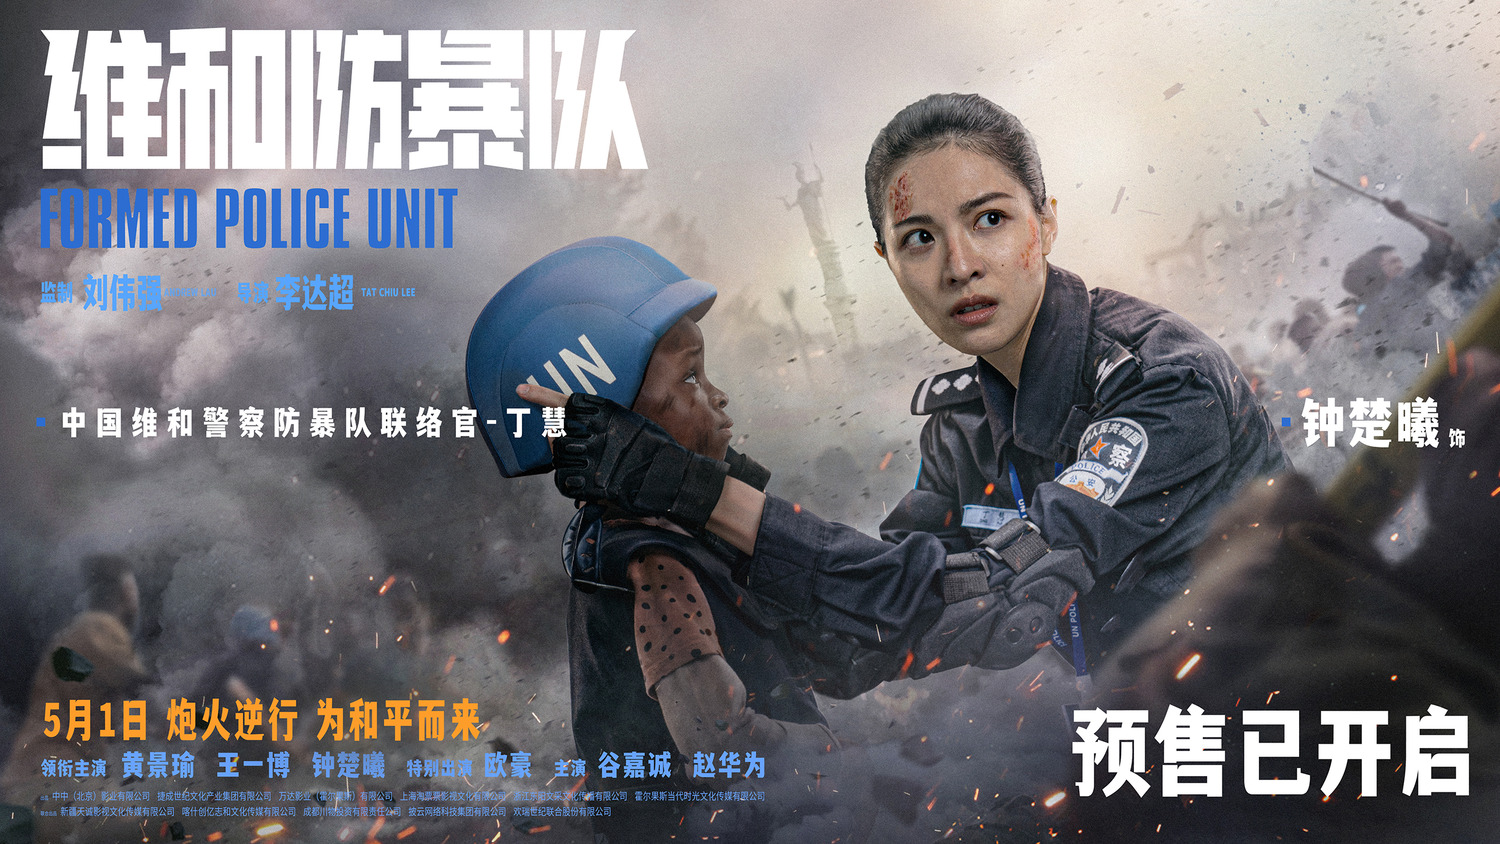 Extra Large Movie Poster Image for Weihe Fangbao Dui (#5 of 6)